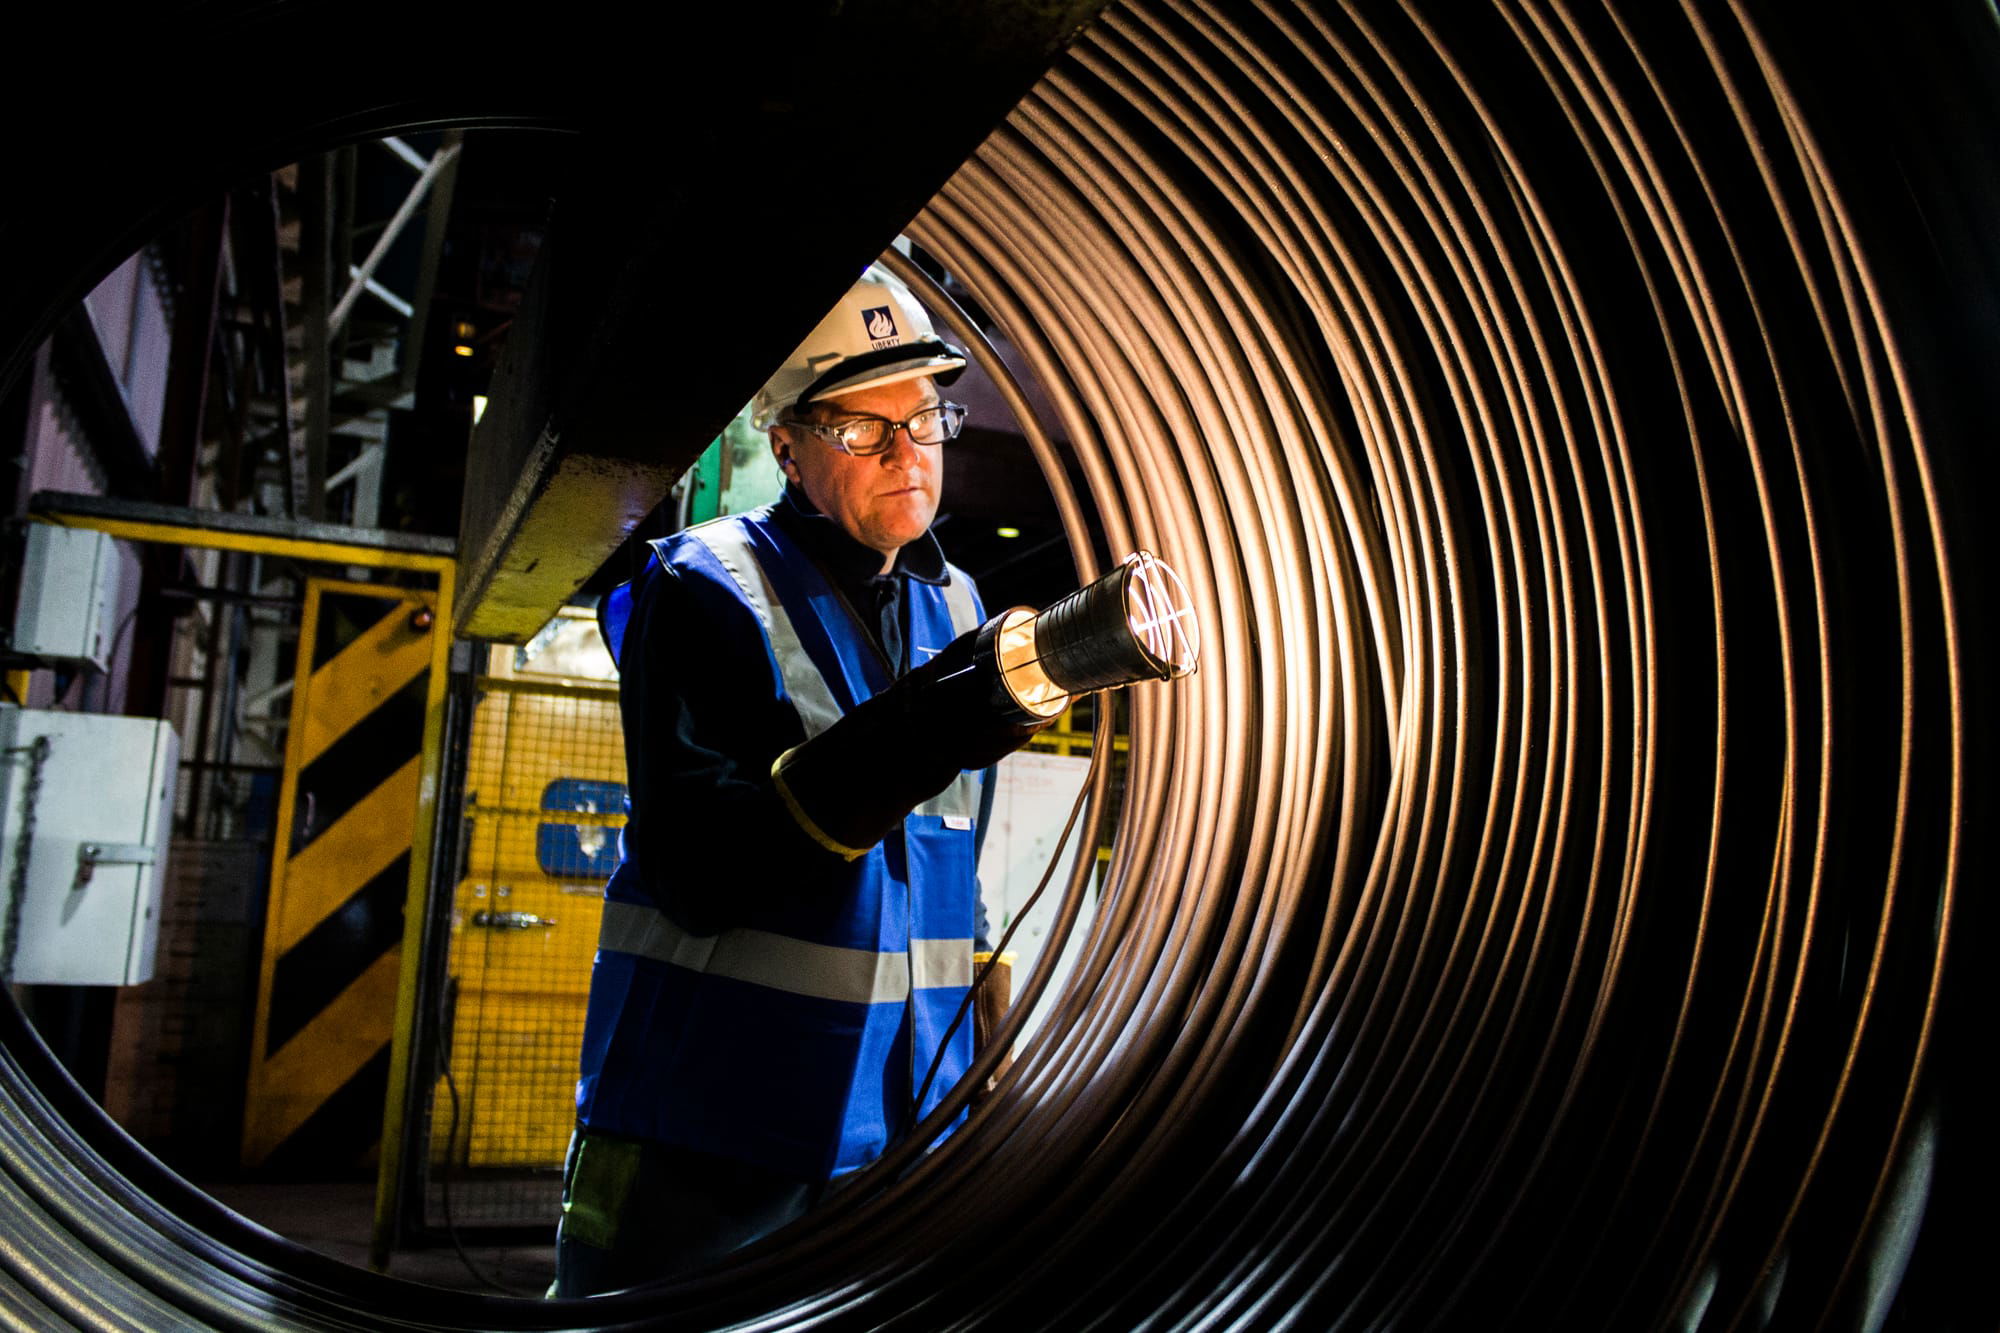 UK Steel comments on Liberty Steel's restructuring announcement